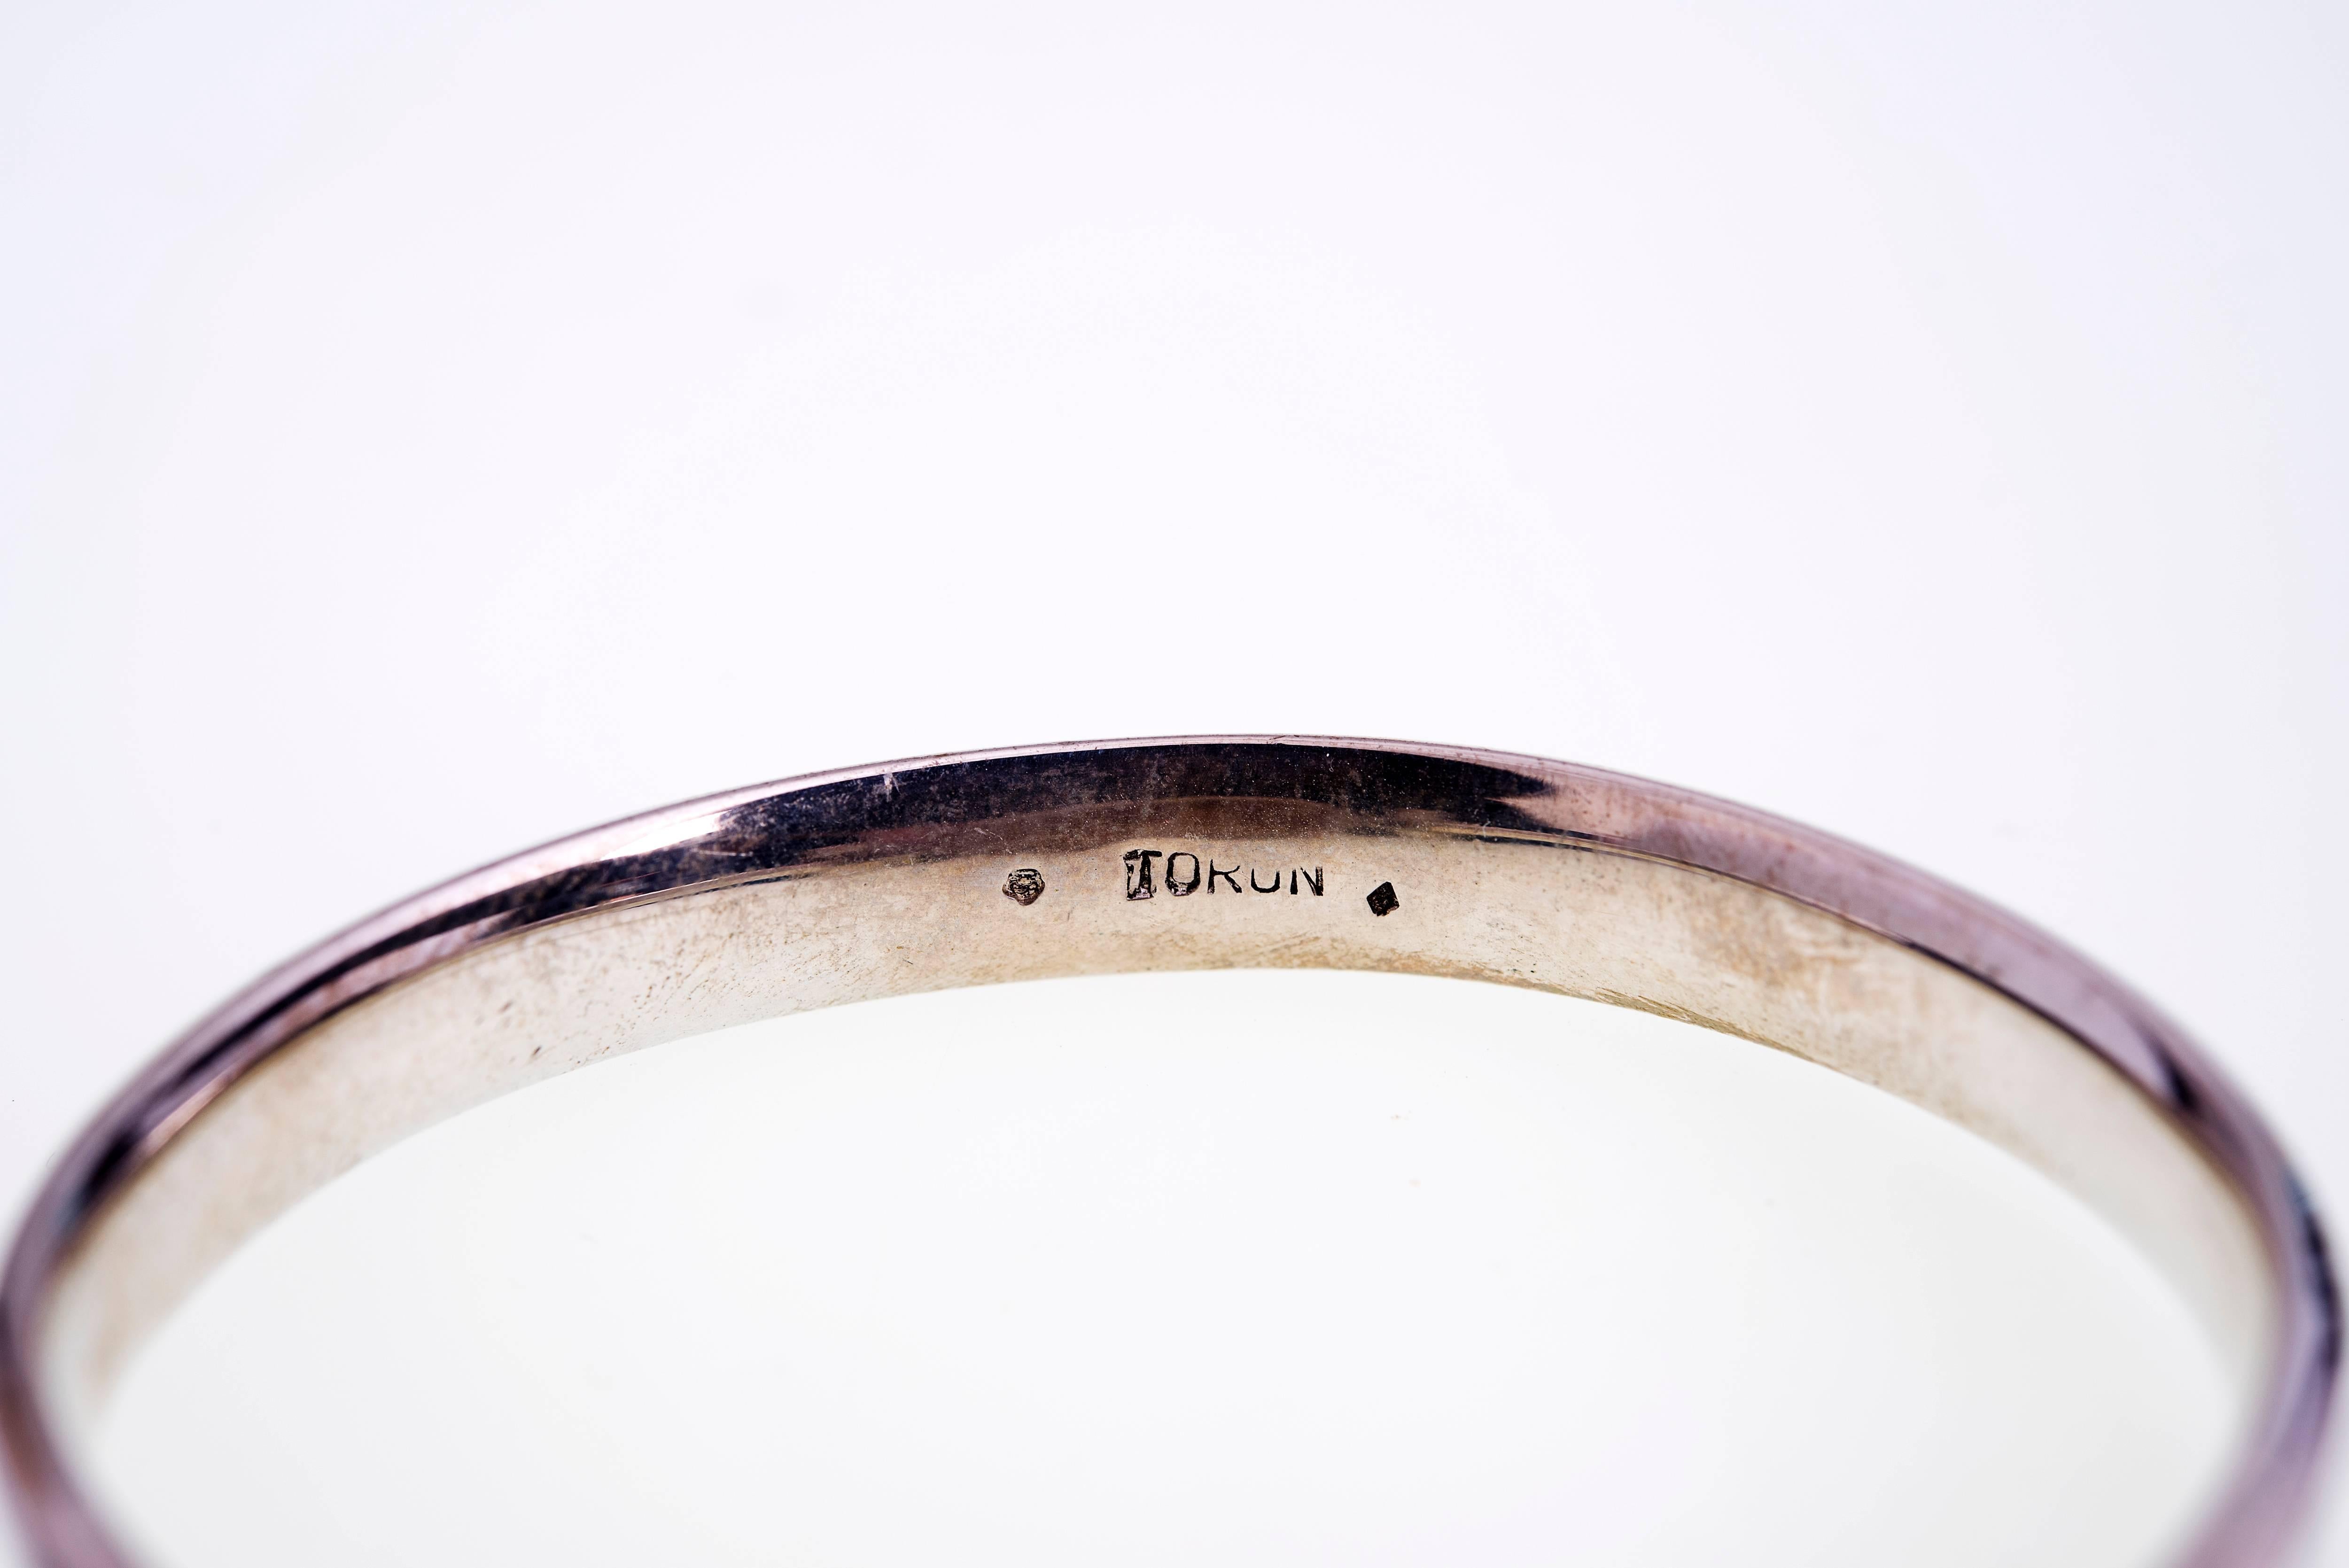 Extremely rare silver and rutilated quartz bracelet designed by Vivianna Torun Bülow-Hübe during her French period (late 50', early 60').

Later (after 1967) produced by Georg Jensen.

This is an early piece produced in her own